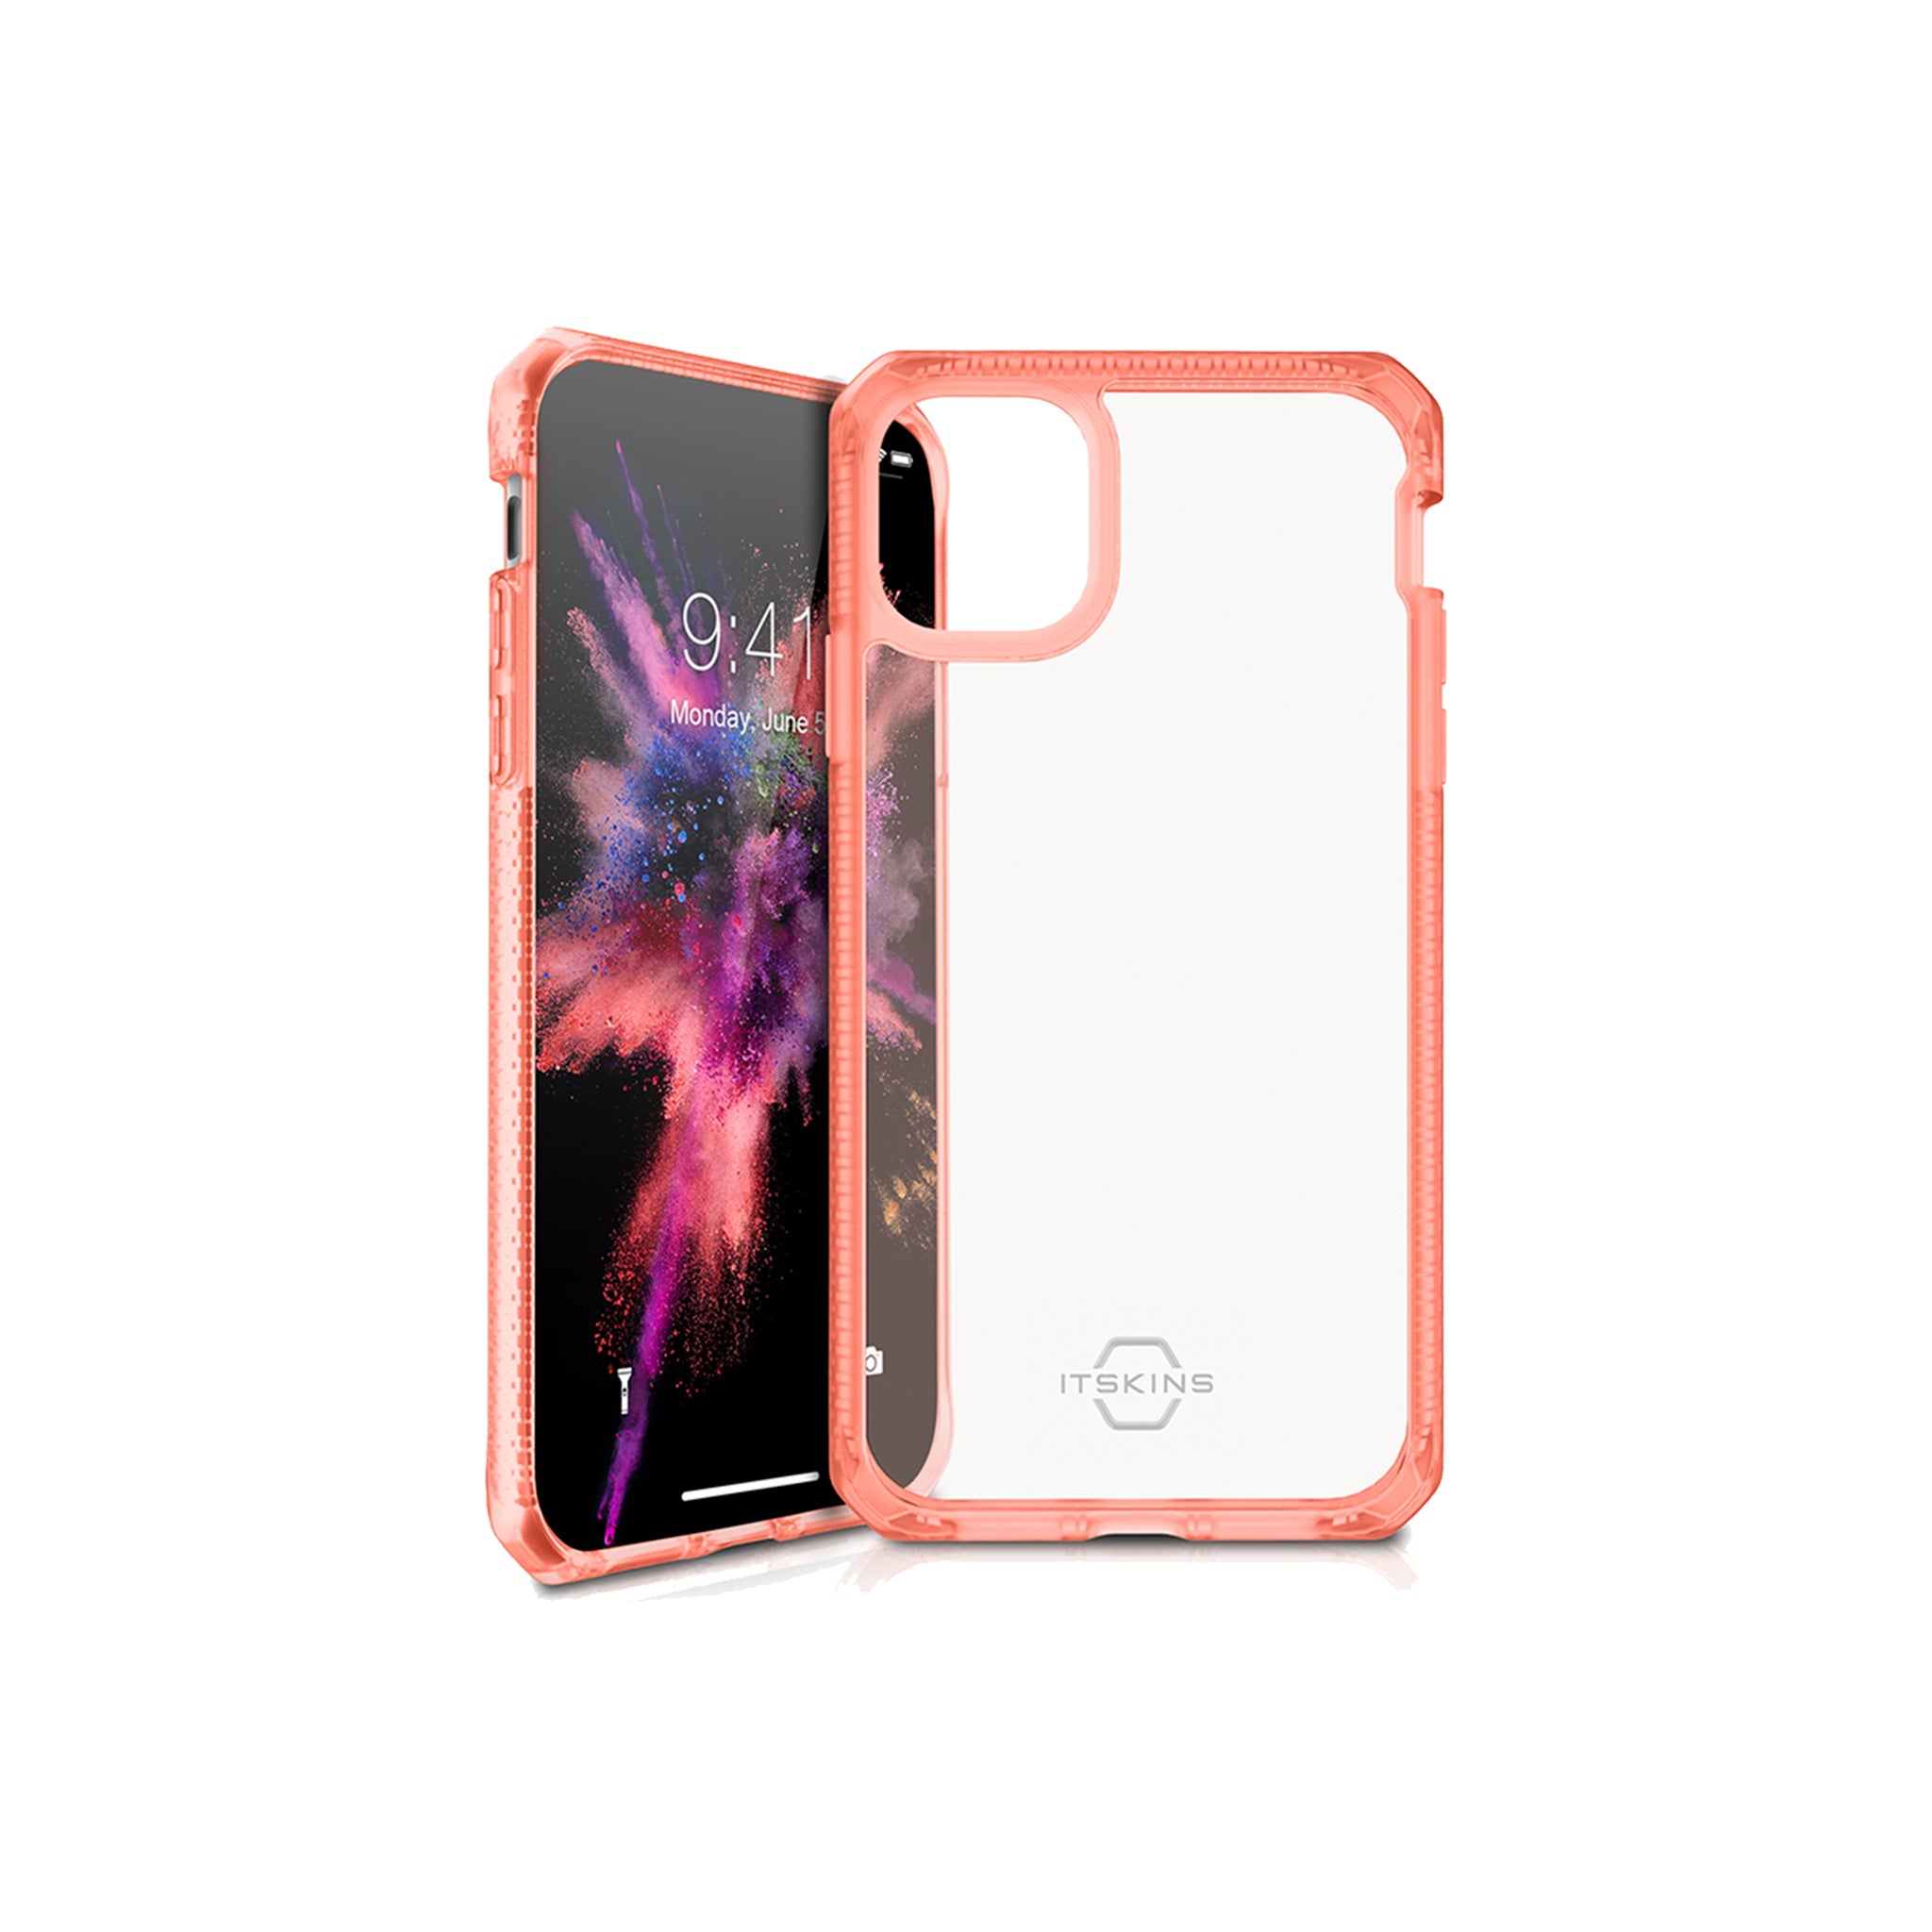 Itskins - Hybrid Frost Mkii Case For Apple Iphone 11 Pro - Coral And Transparent